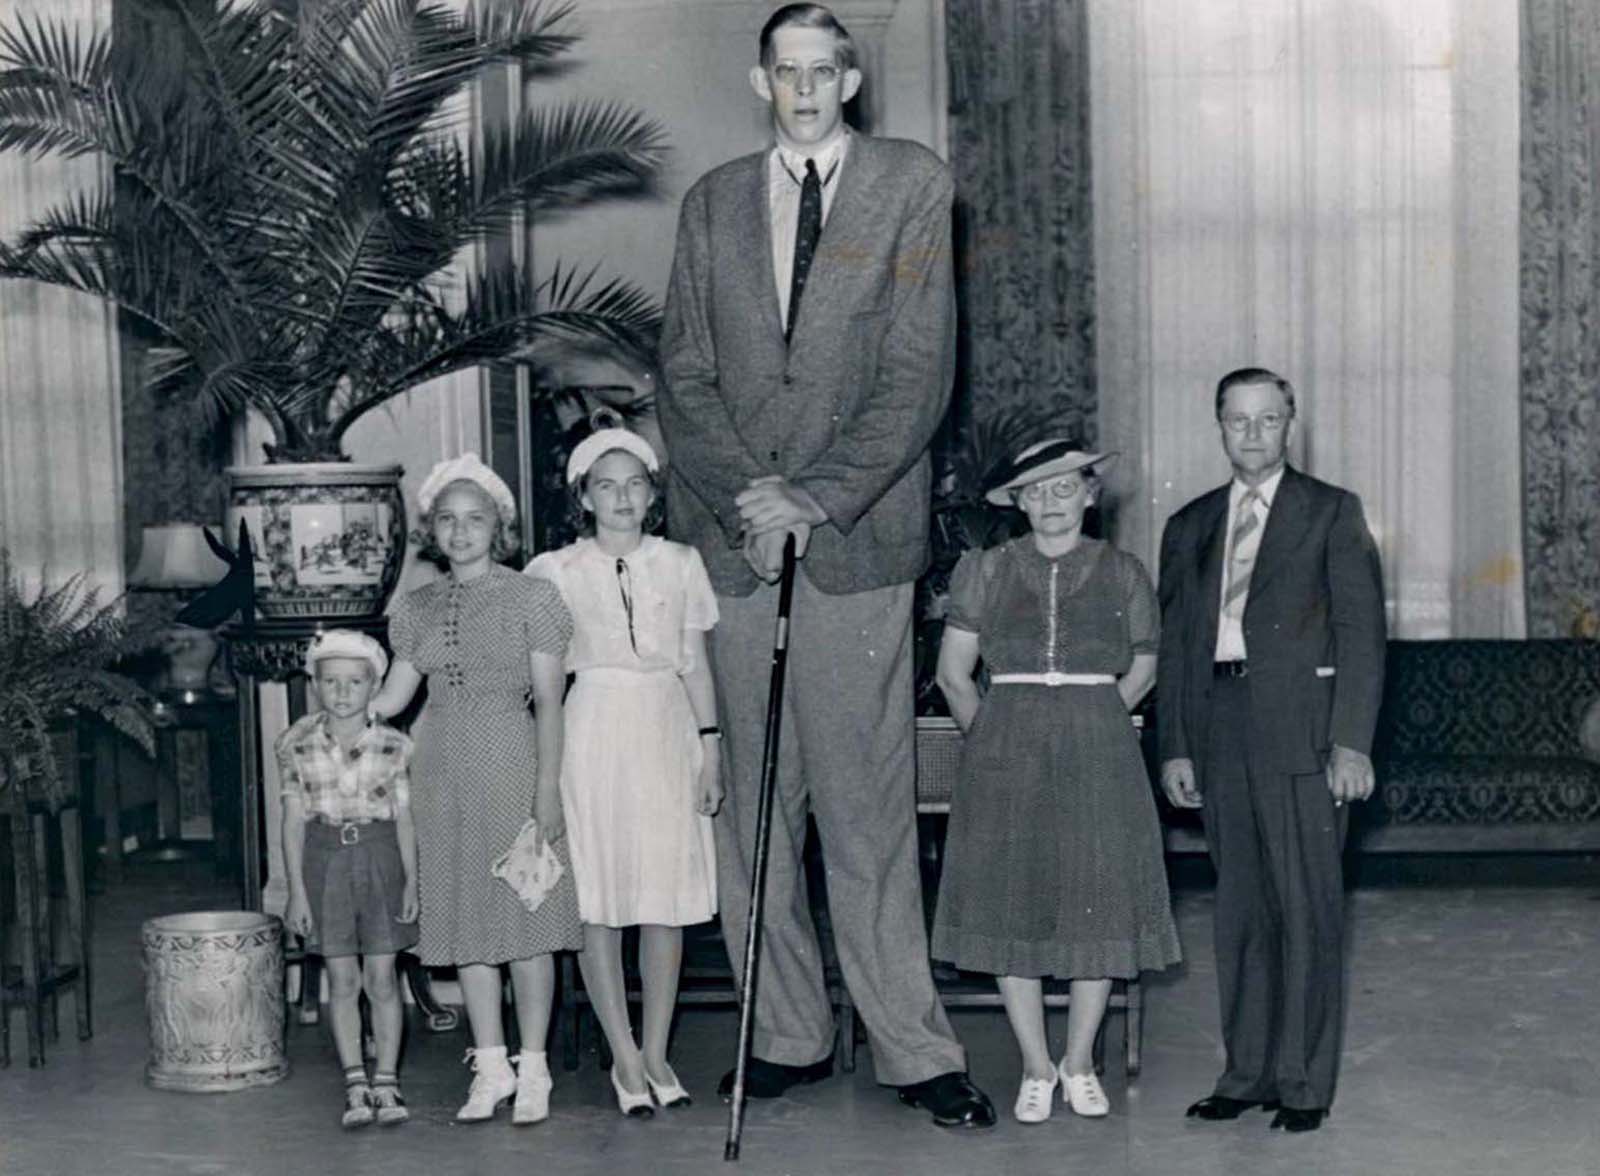 The tallest man in the world stands alongside his family, who are all of average height and weight.